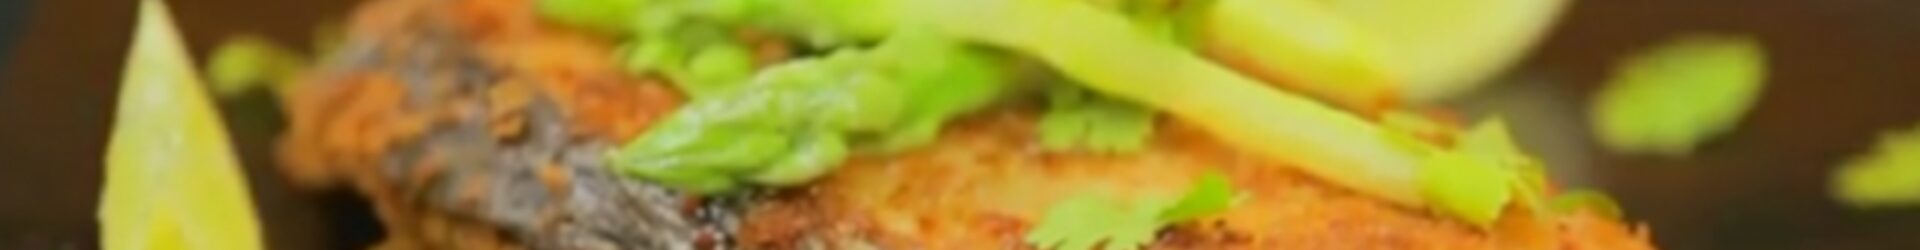 Pan Fried Crumbed Surmai With Asparagus